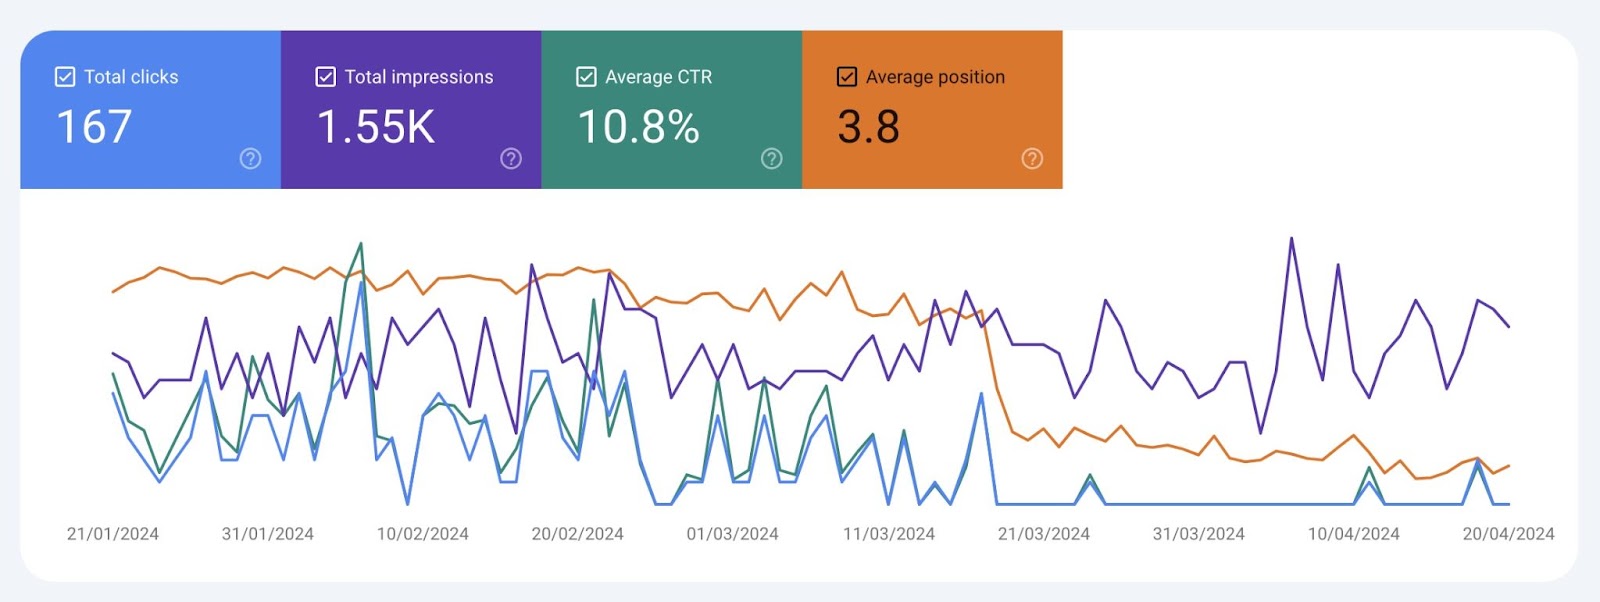 a line chart showing data for total clicks, total impressions, average CTR, and average position